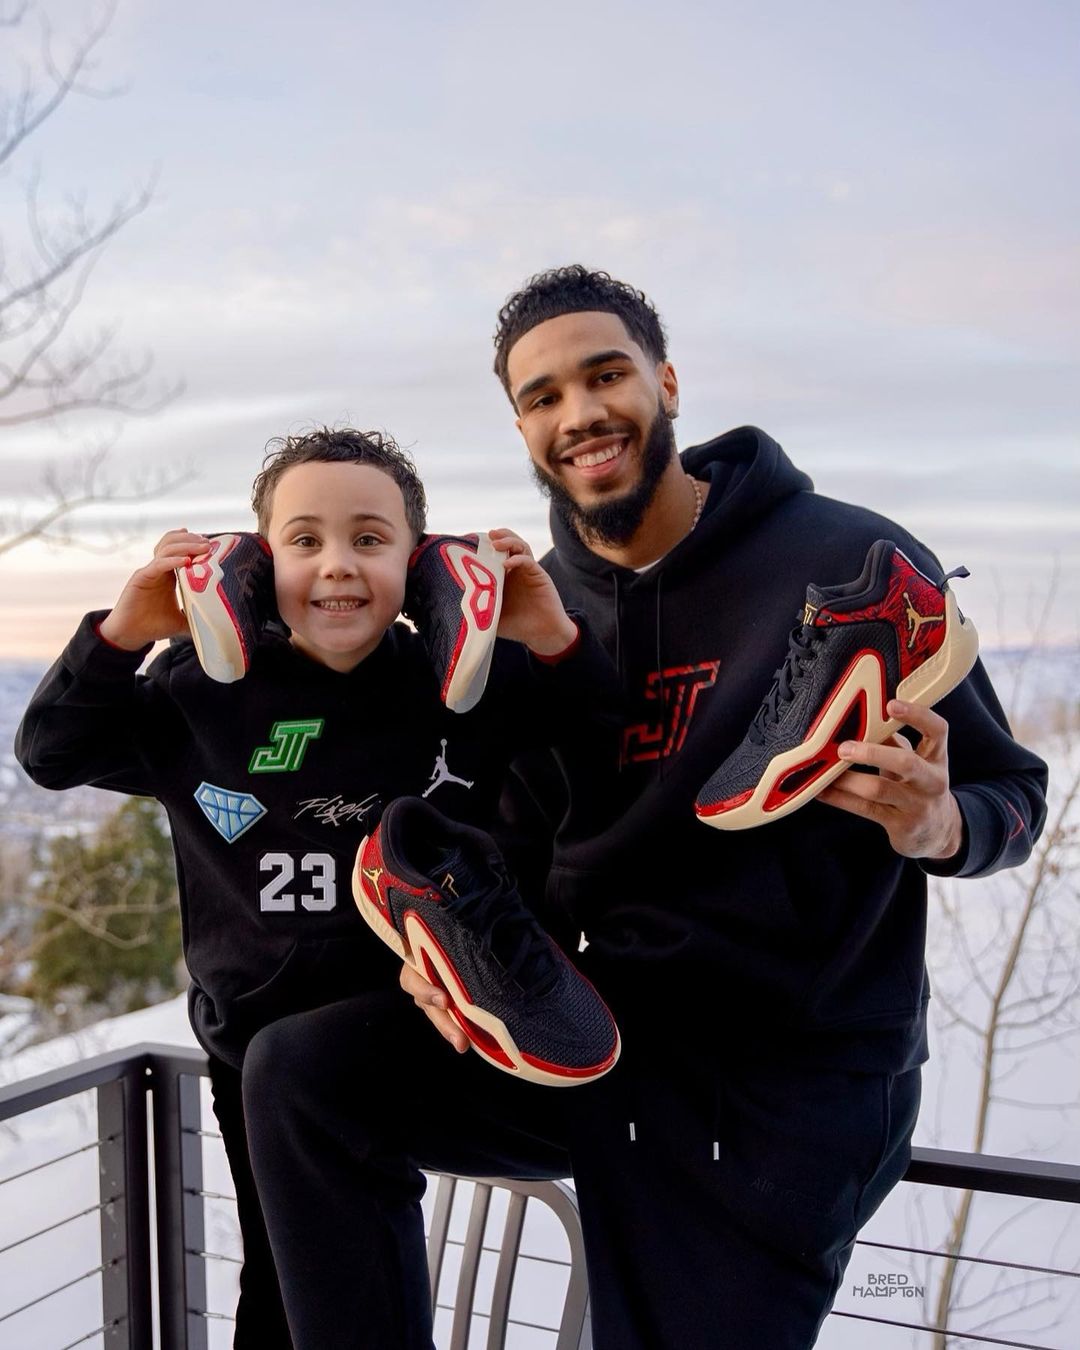 Jayson Tatum's $40 Million 'WHITE' Mansion: A Glimpse Inside the Home Where He Enjoys Spending Quality Time With His Son